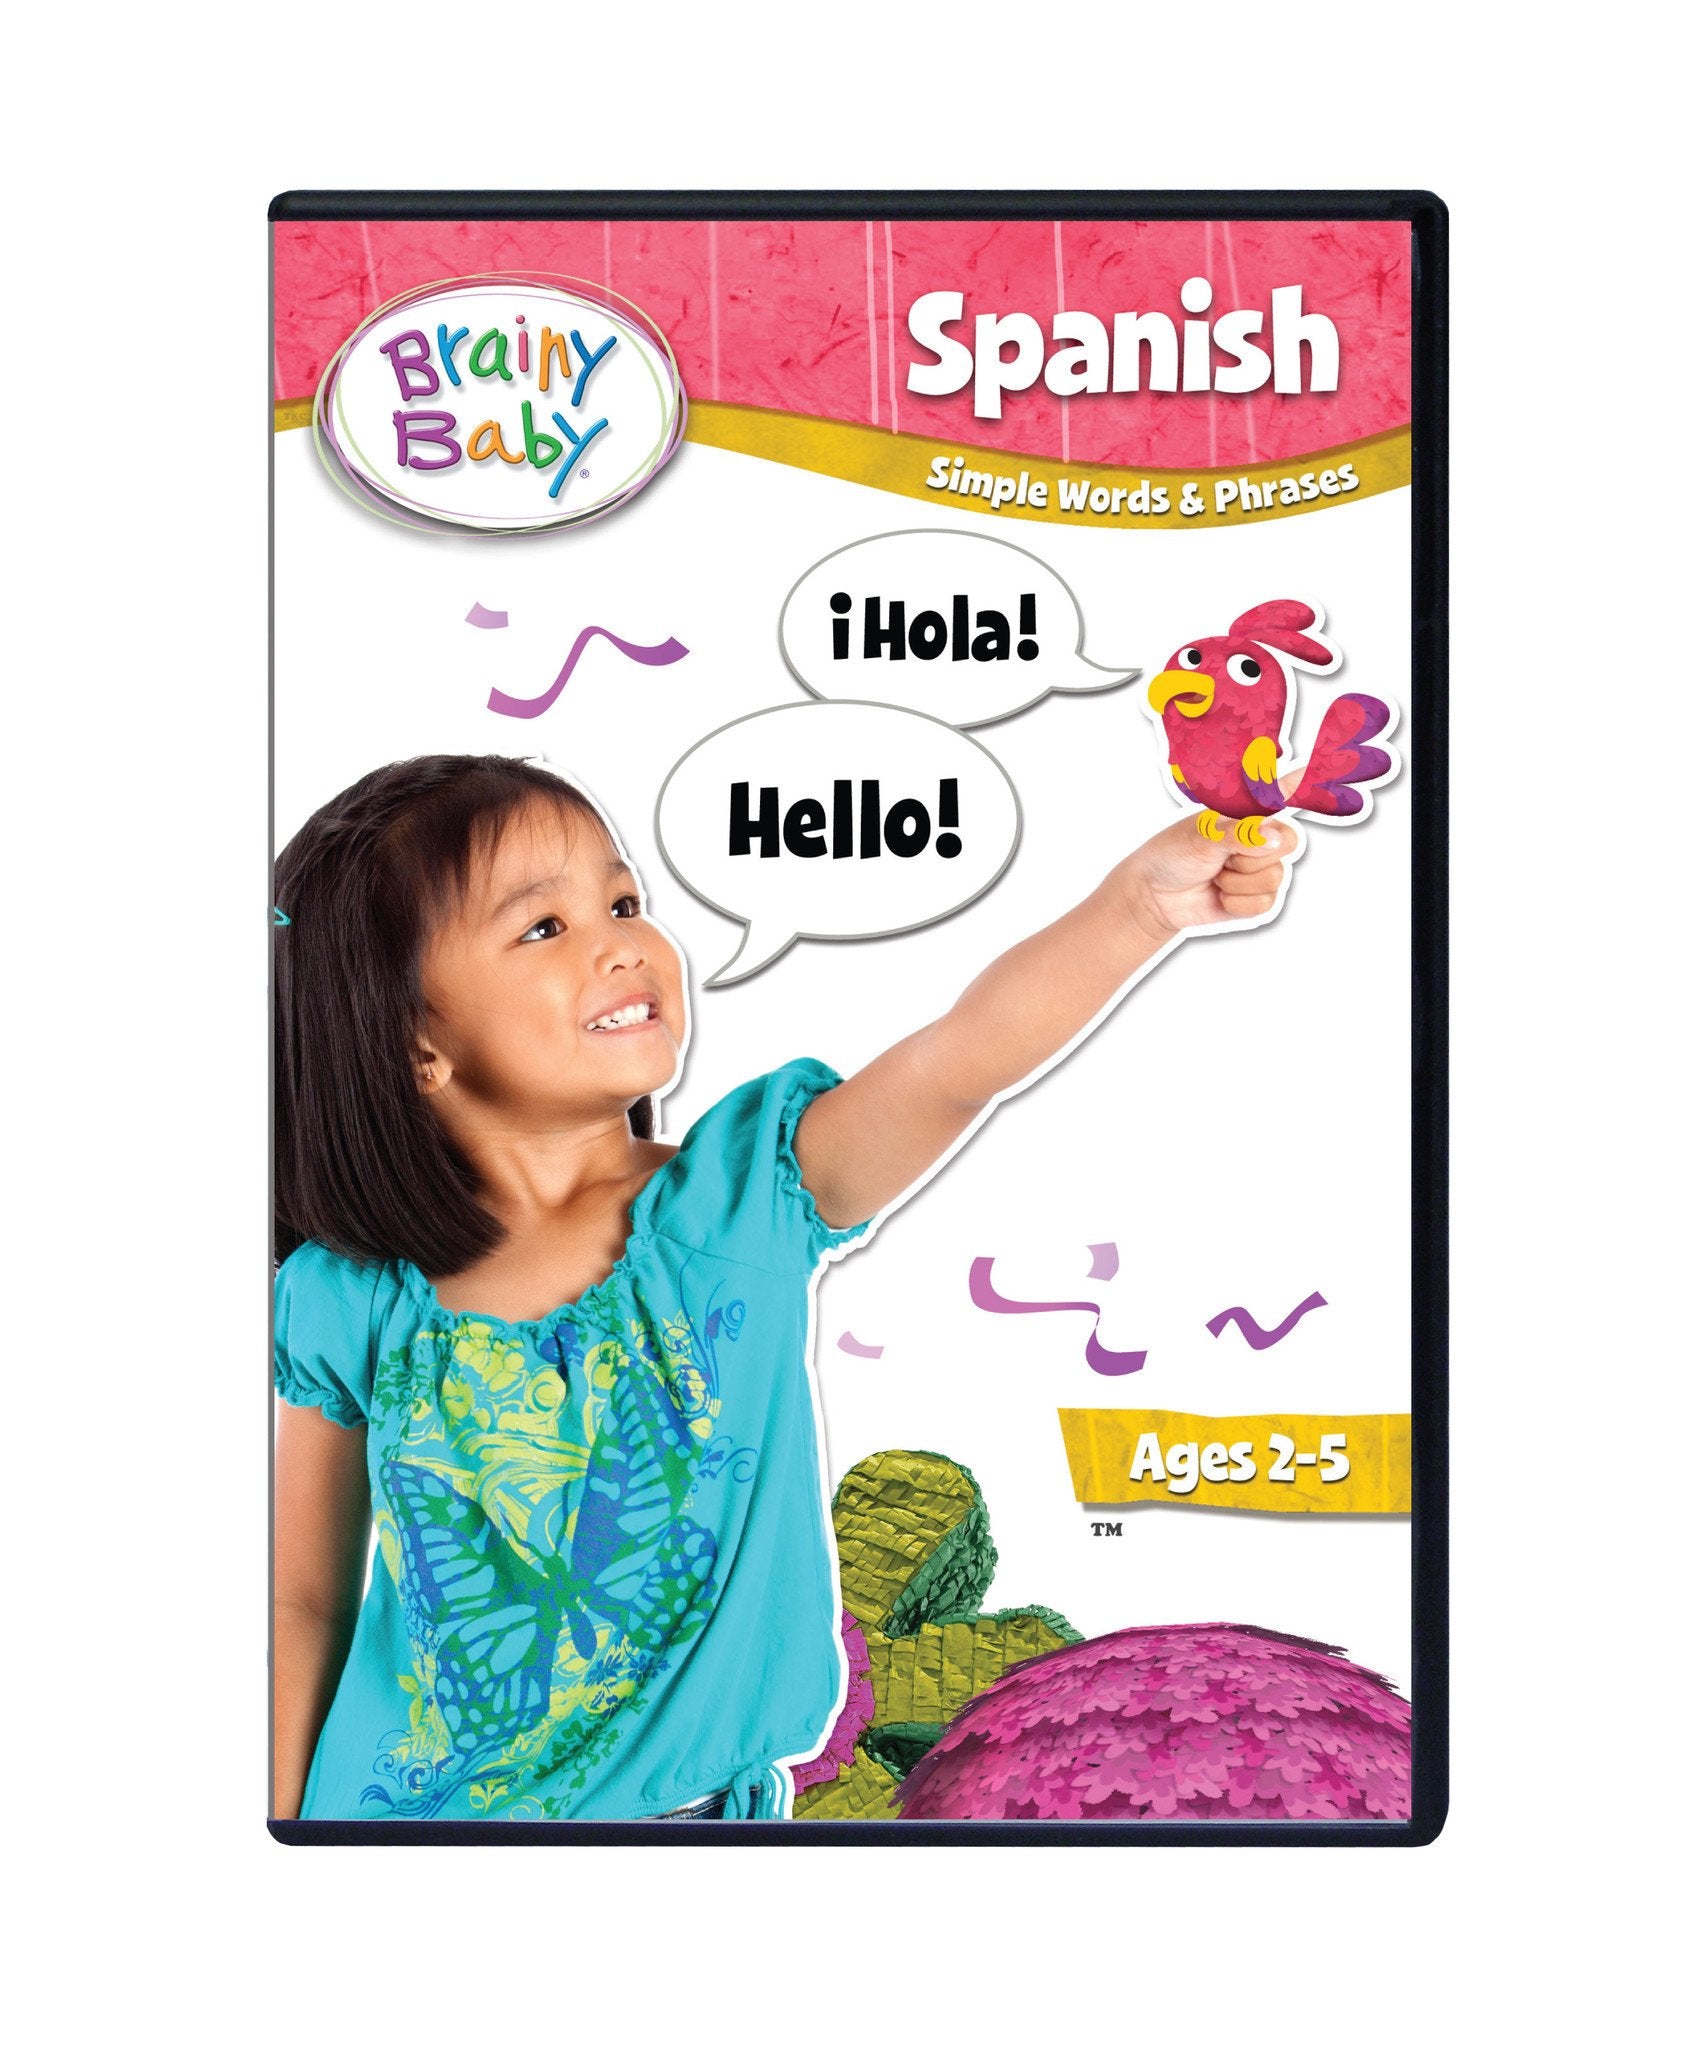 Brainy Baby Spanish DVD Simple Words and Phrases Deluxe Edition